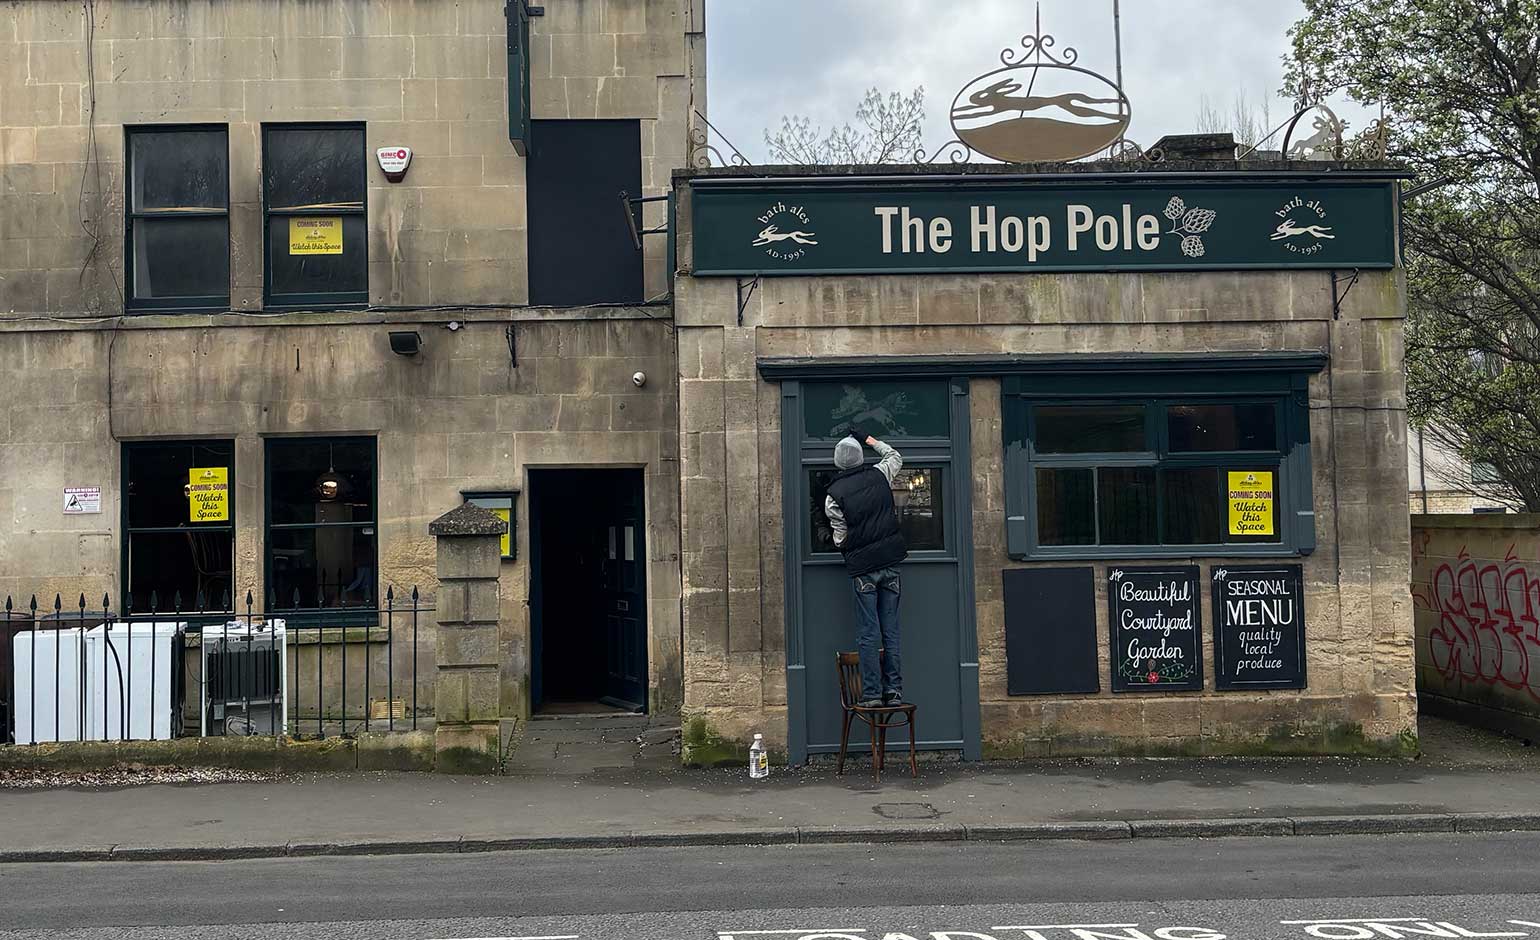 Well-known Bath pub to reopen after sudden closure last summer